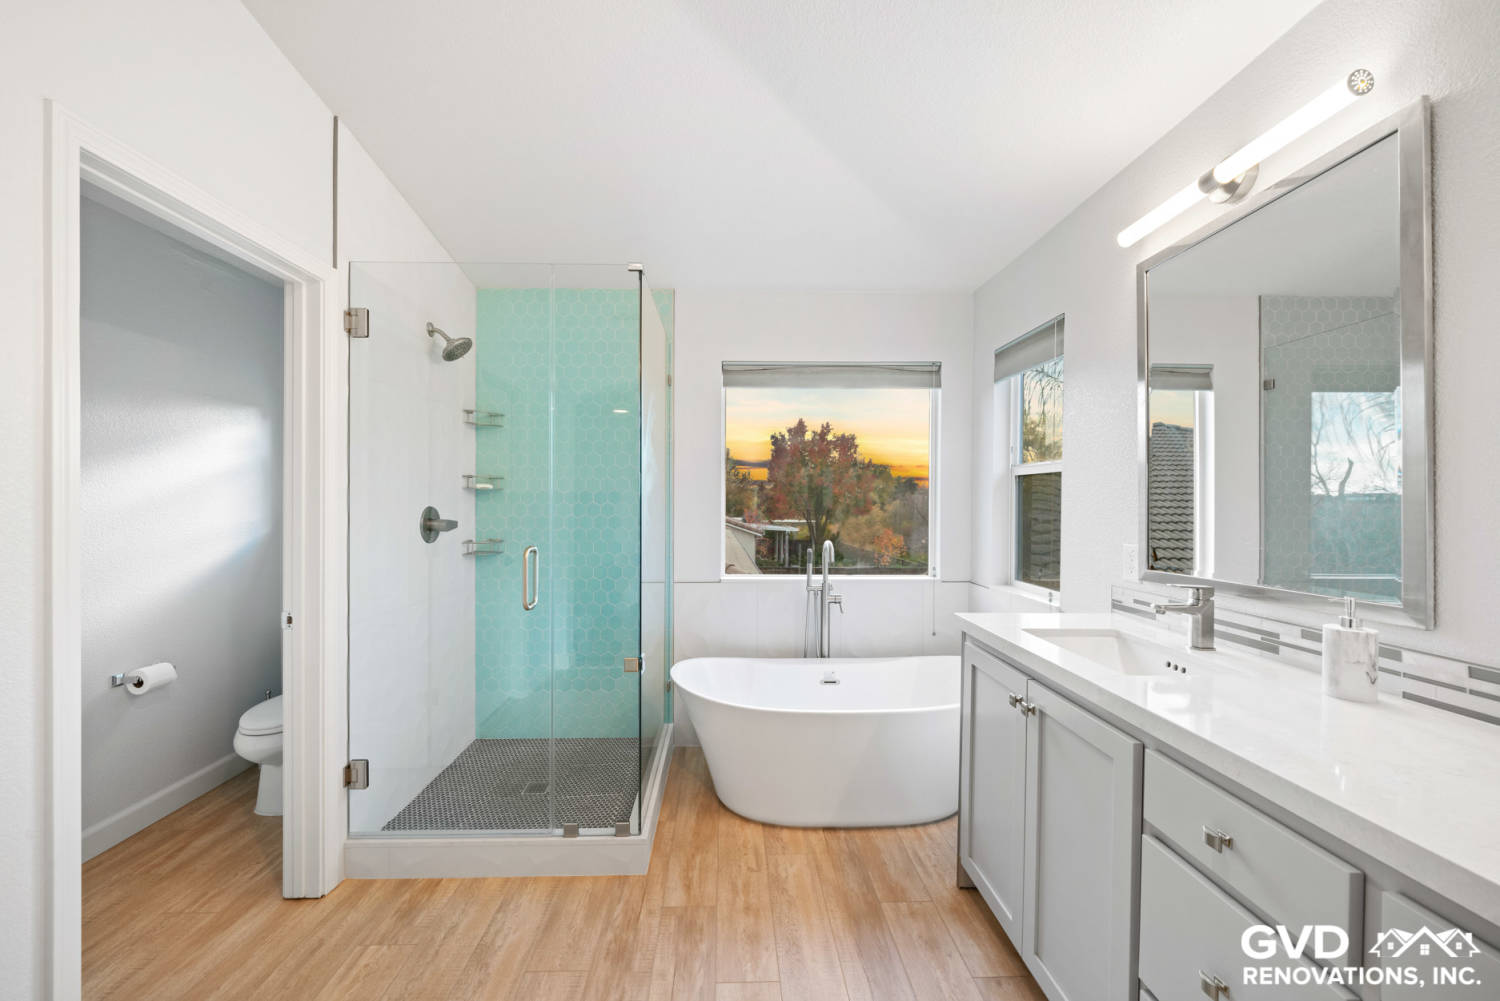 How Much Is the Average Cost of a Bathroom Remodel? The Ultimate Guide to Bathroom Remodel Pricing